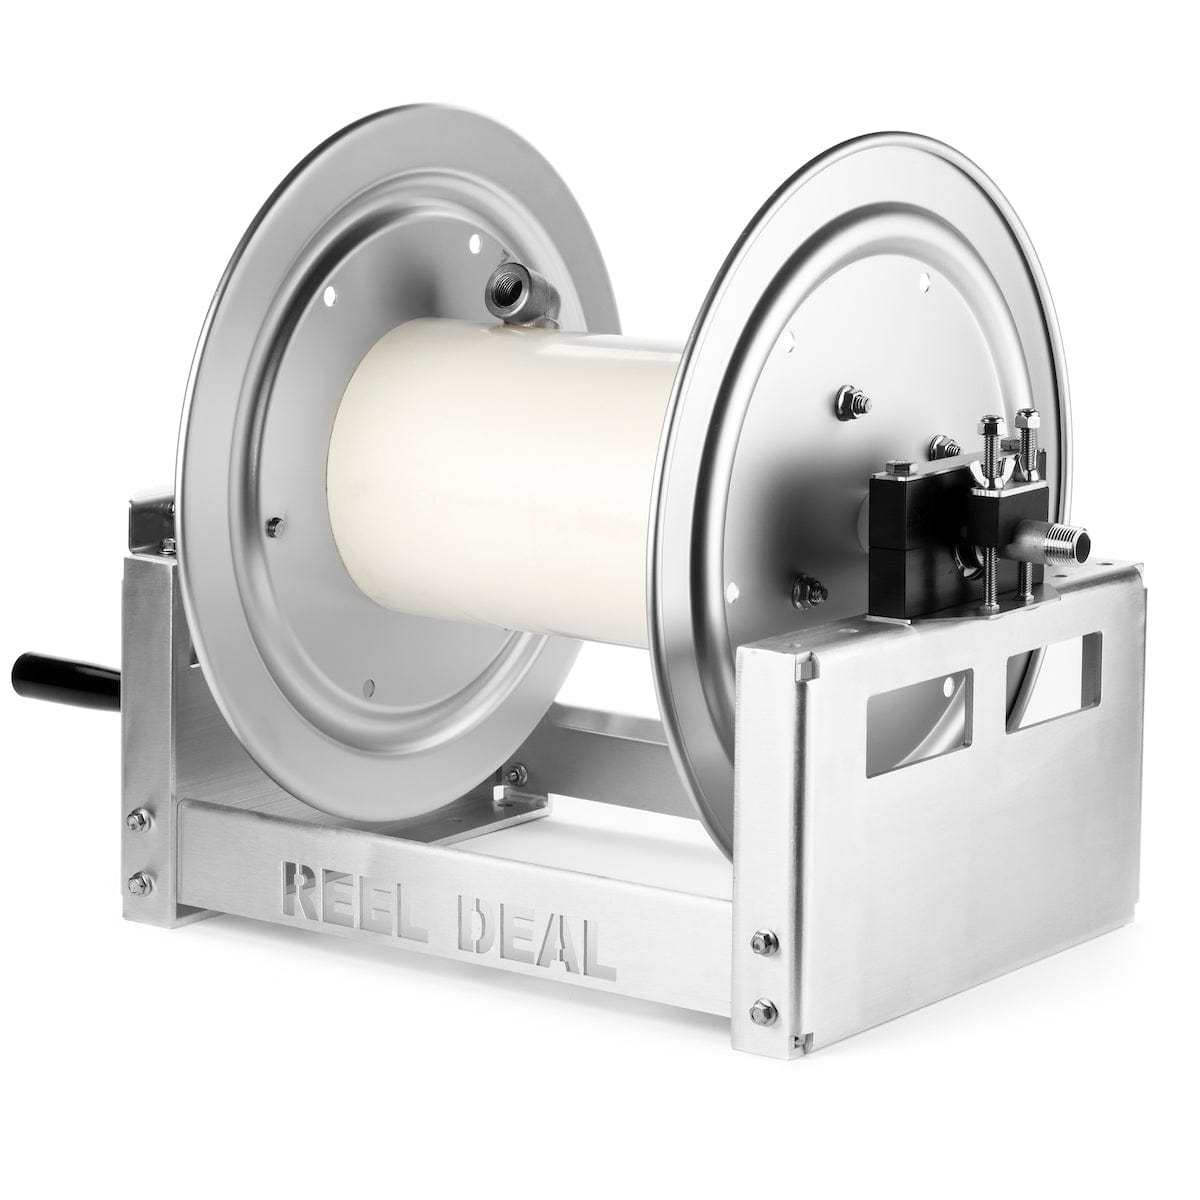 *Reel Deal* Pressure Washer & Soft Wash Hose Reel-12 inch With Swivel